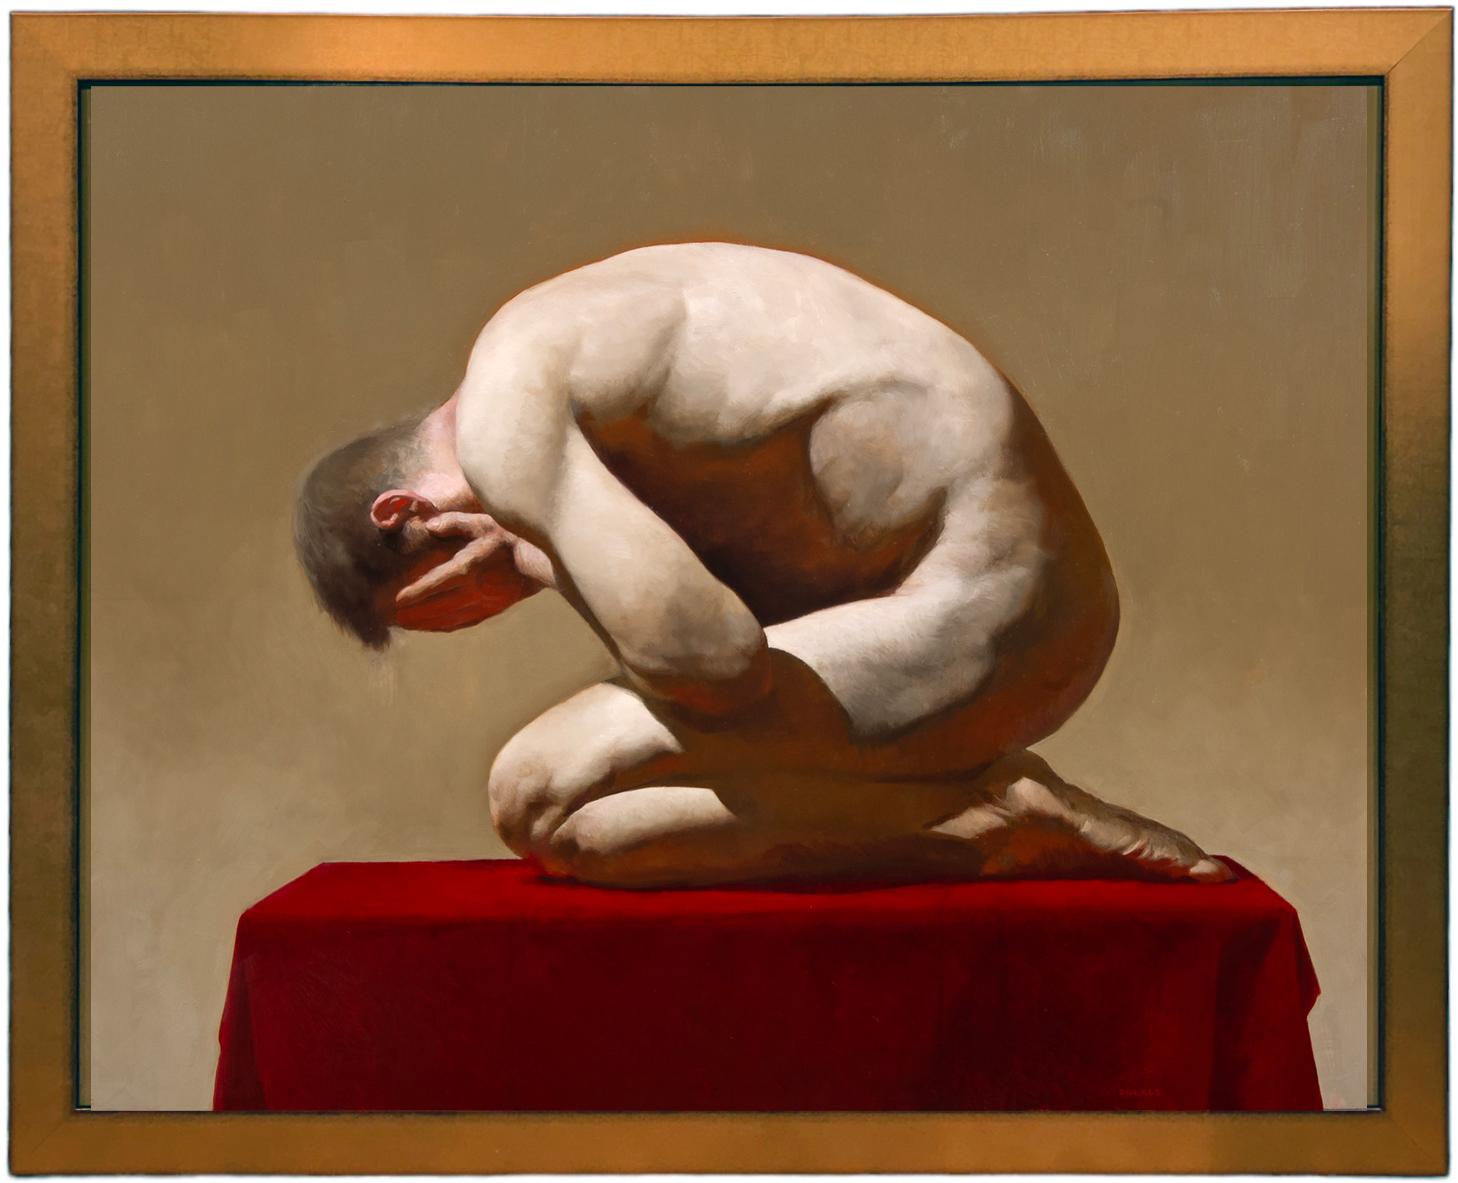 Zack Zdrale Figurative Painting - Shame, Nude Male Crouched on Red Velvet Covered Table, Original Oil on Panel